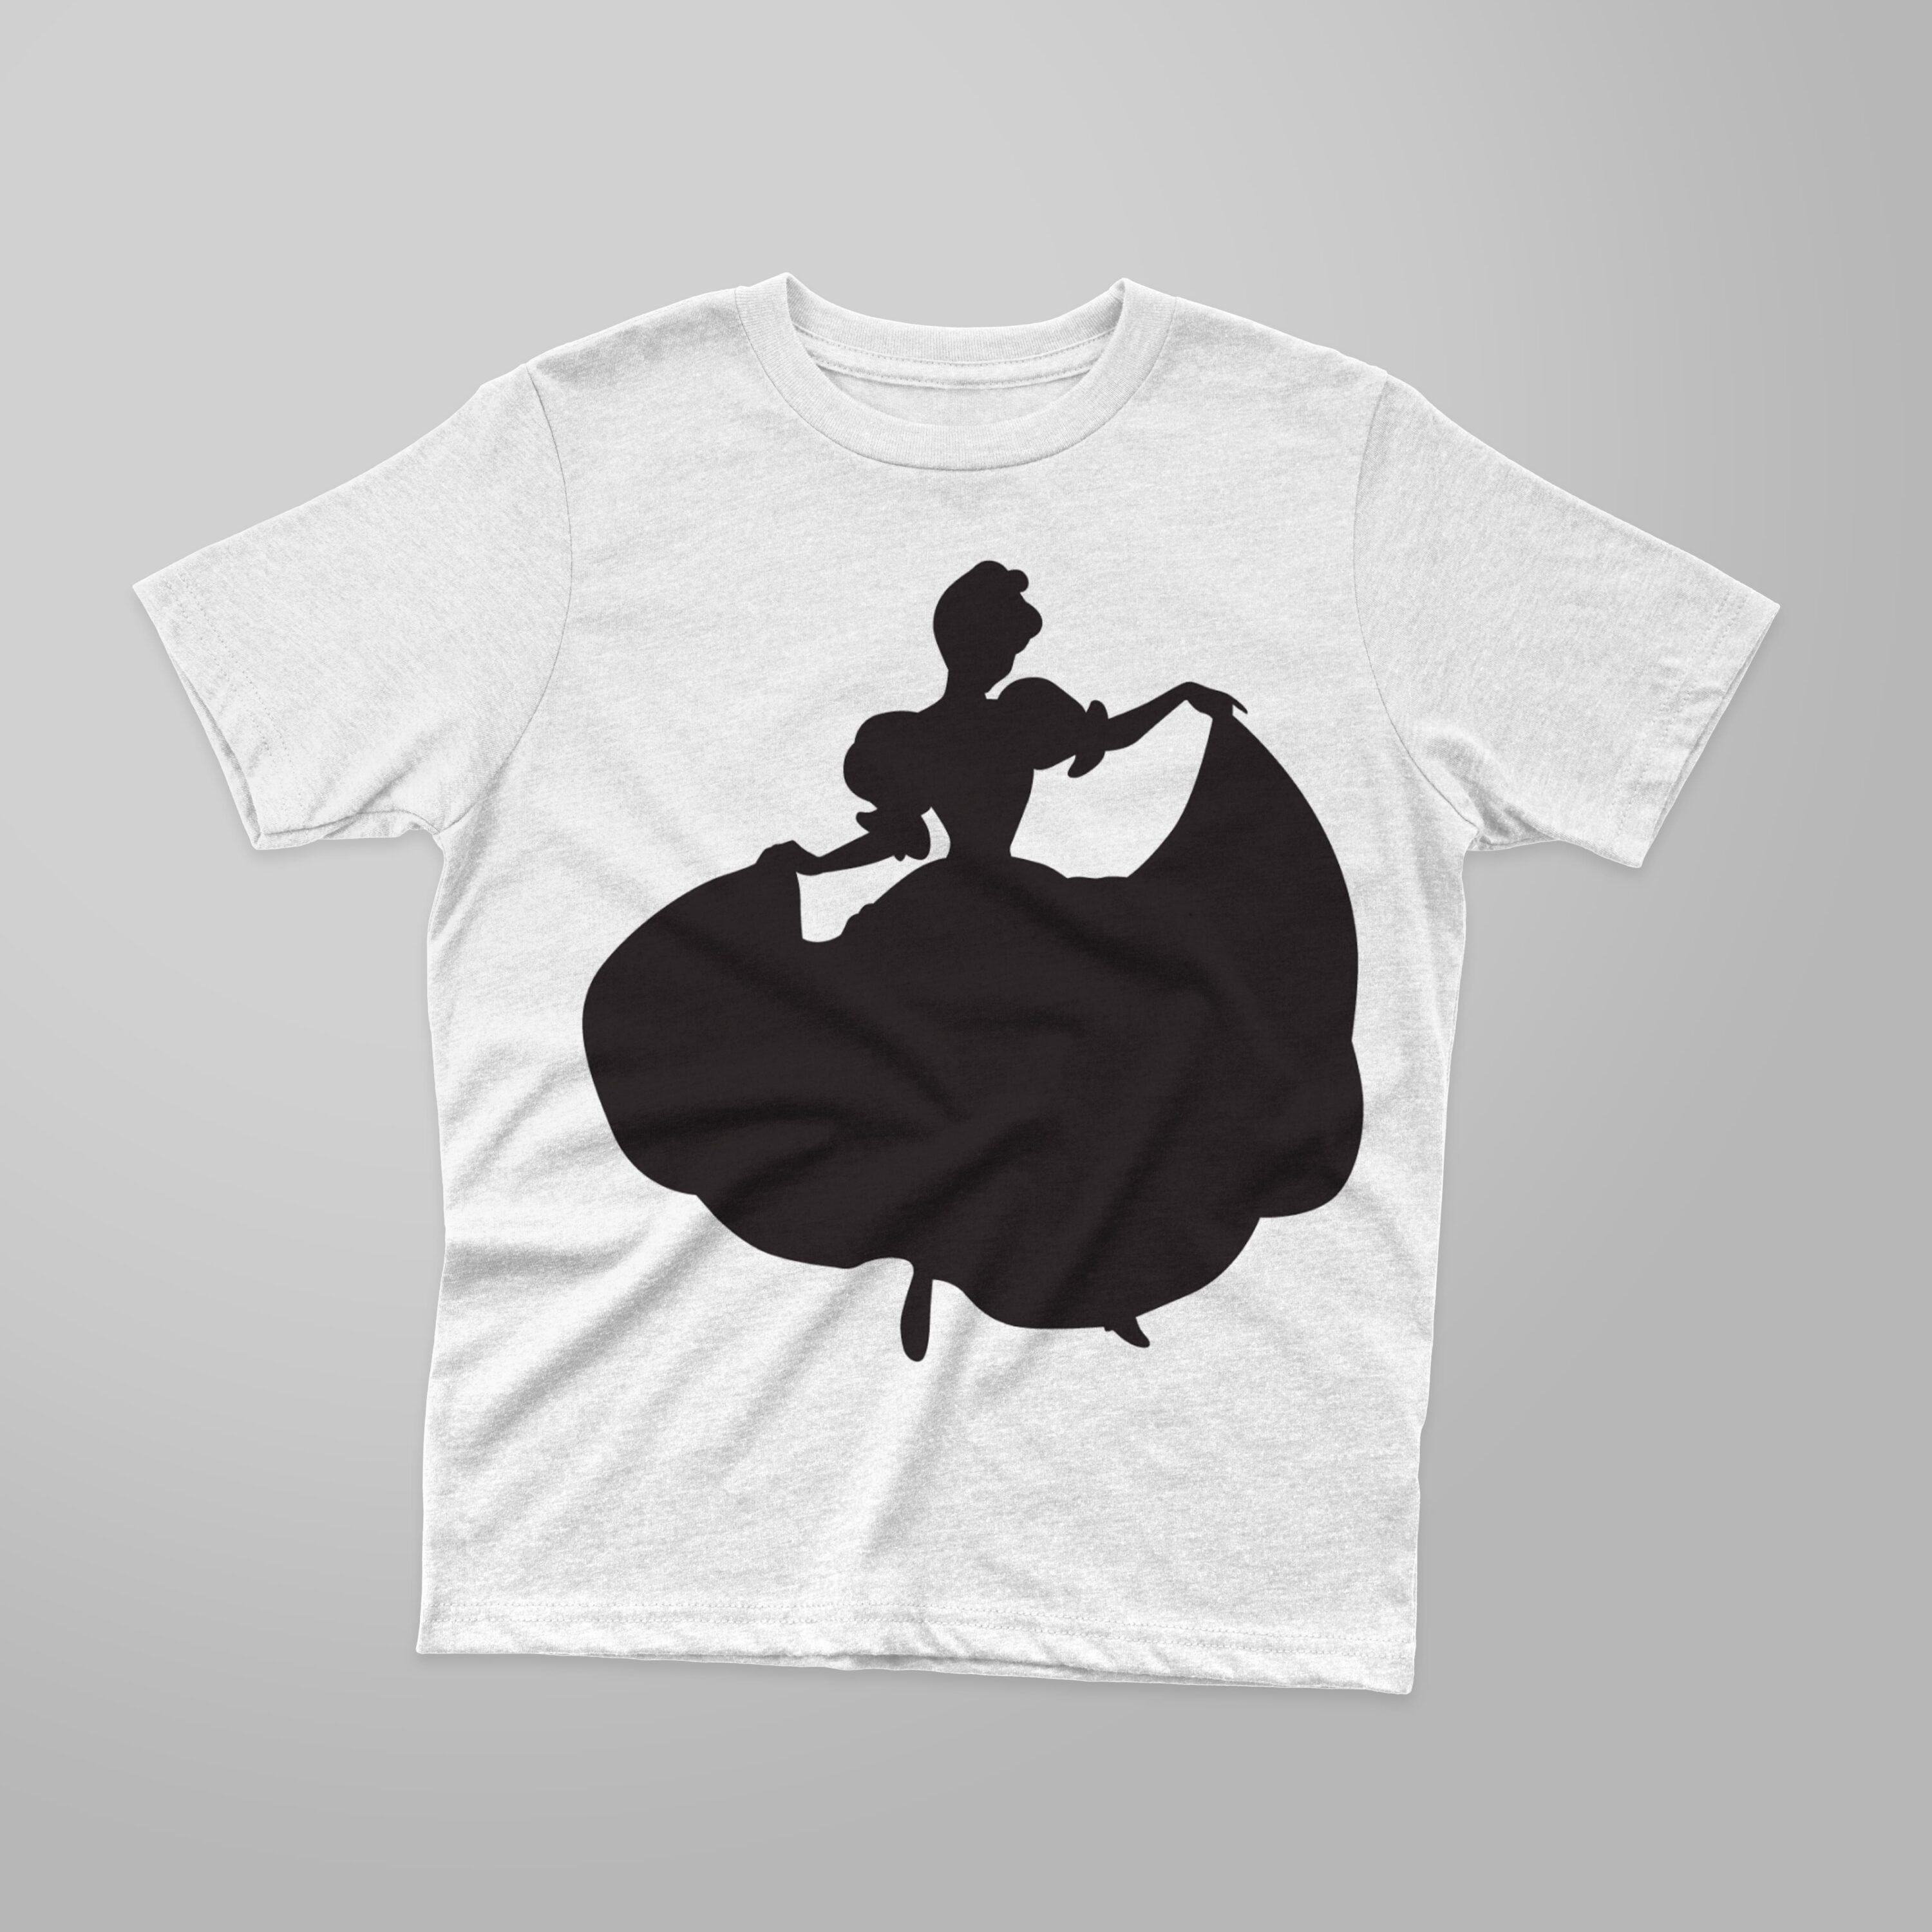 Picture of a white t-shirt with a cute Cinderella silhouette print.